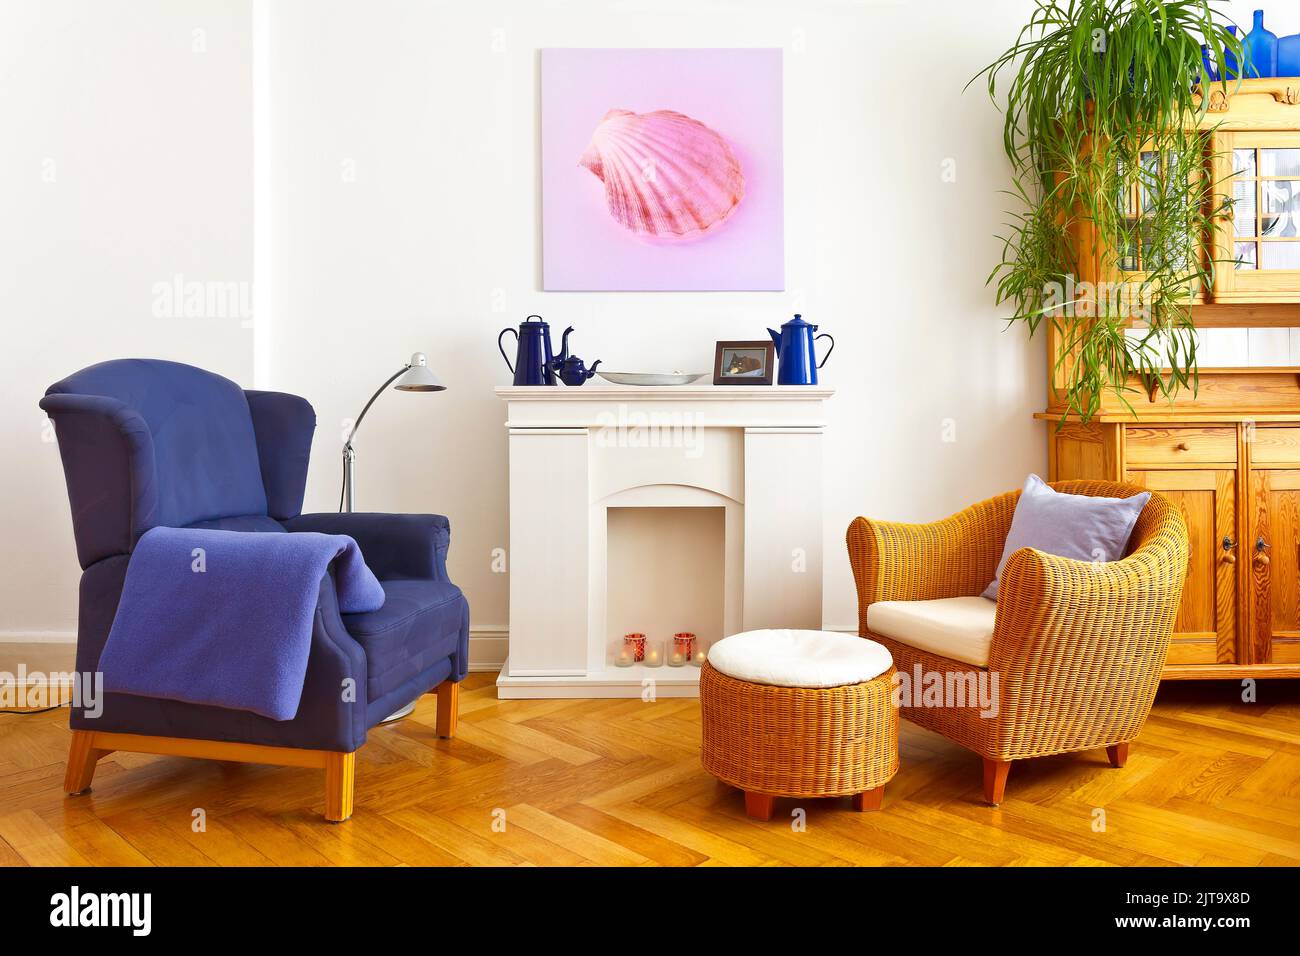 Custom-made home decoration concept: living room with a wing and a wicker chair, and a square canvas print of a pink shell picture. Stock Photo